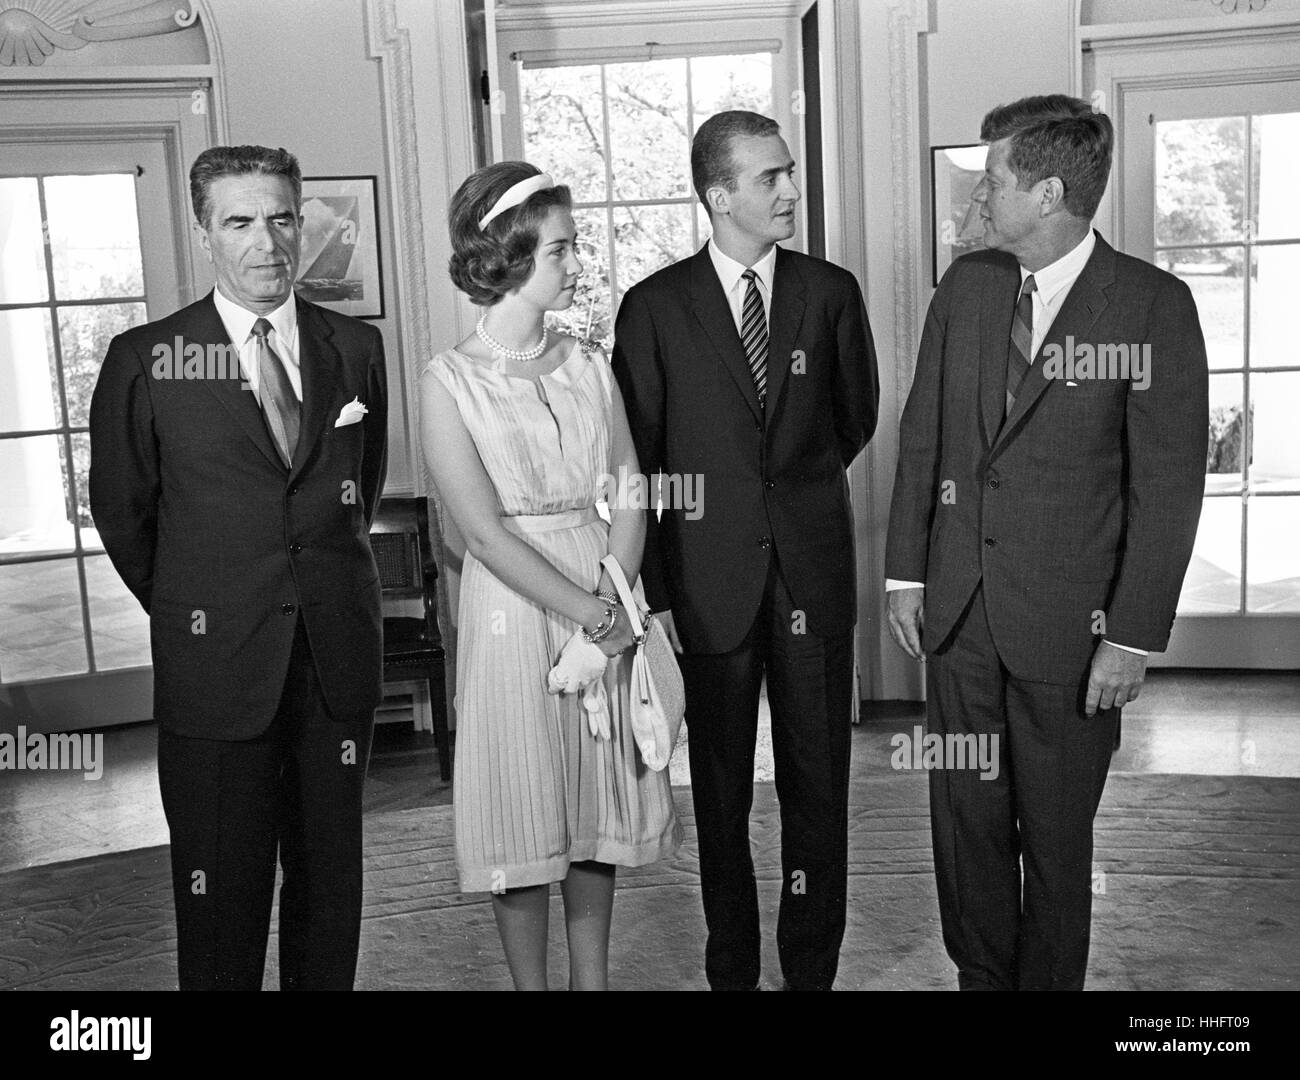 United States President John F. Kennedy, right, meets with Prince Juan Carlos of Spain, center right, and his wife, Princess Sophia of Greece, center left, and Ambassador of Spain, Antonio Garrigues y Díaz-Cañabate, left, in the Oval Office of the White House in Washington, DC on August 30, 1962. Credit: Arnie Sachs / CNP - NO WIRE SERVICE - Photo: Arnie Sachs/Consolidated/dpa Stock Photo